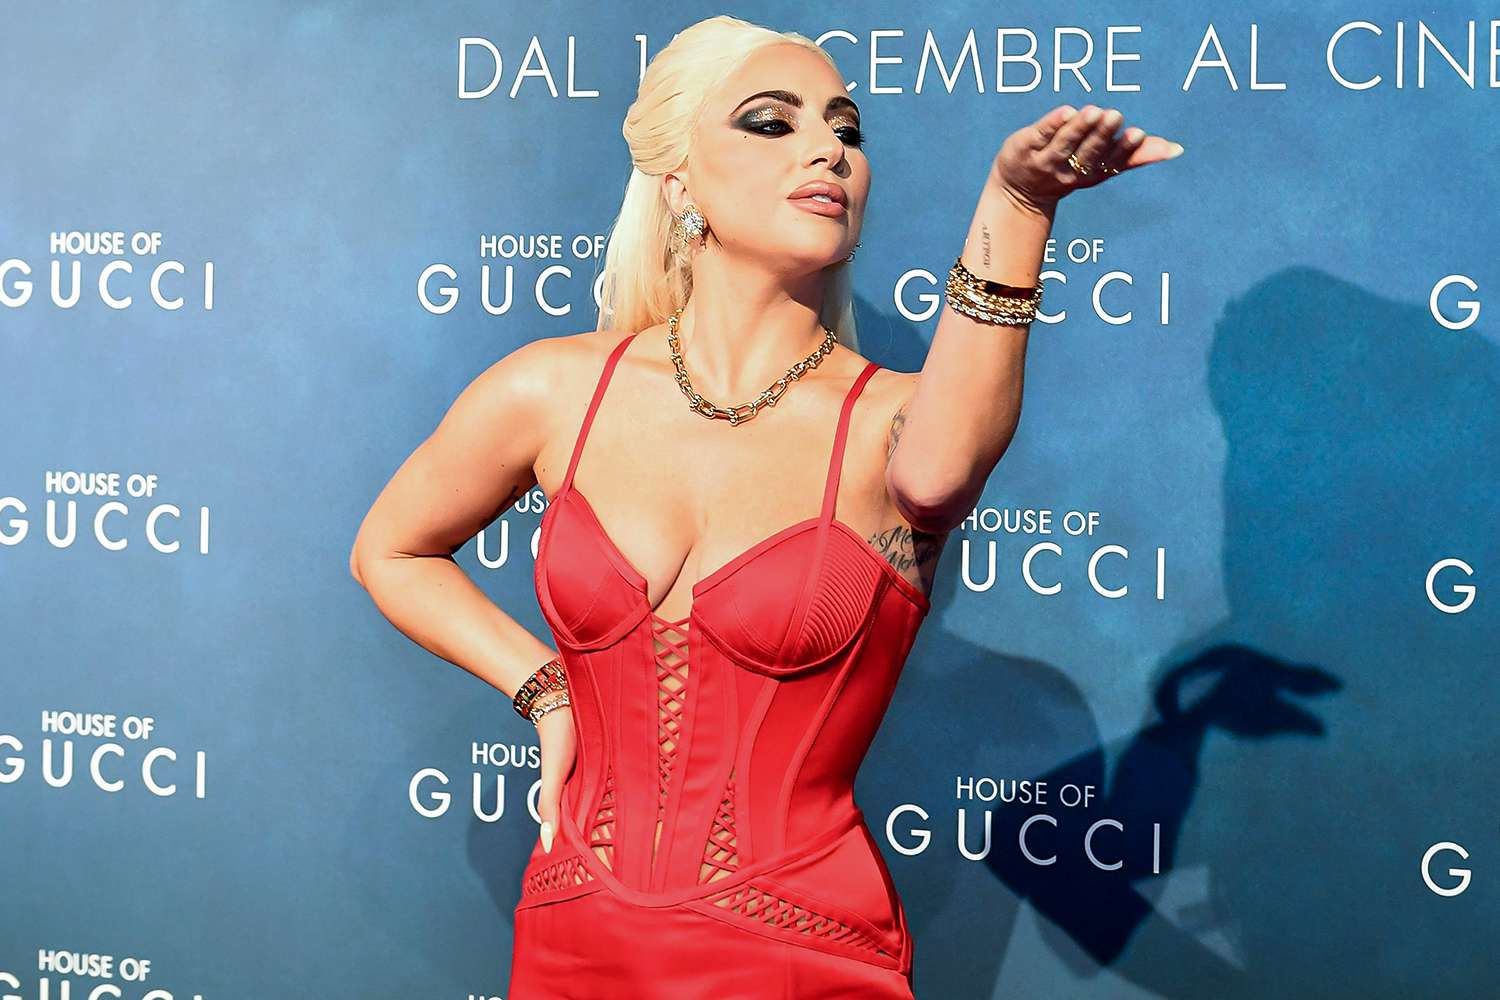 Lady Gaga on the red carpet of the premiere of movie 'House of Gucci', in Milan, Italy, 13 November 2021.